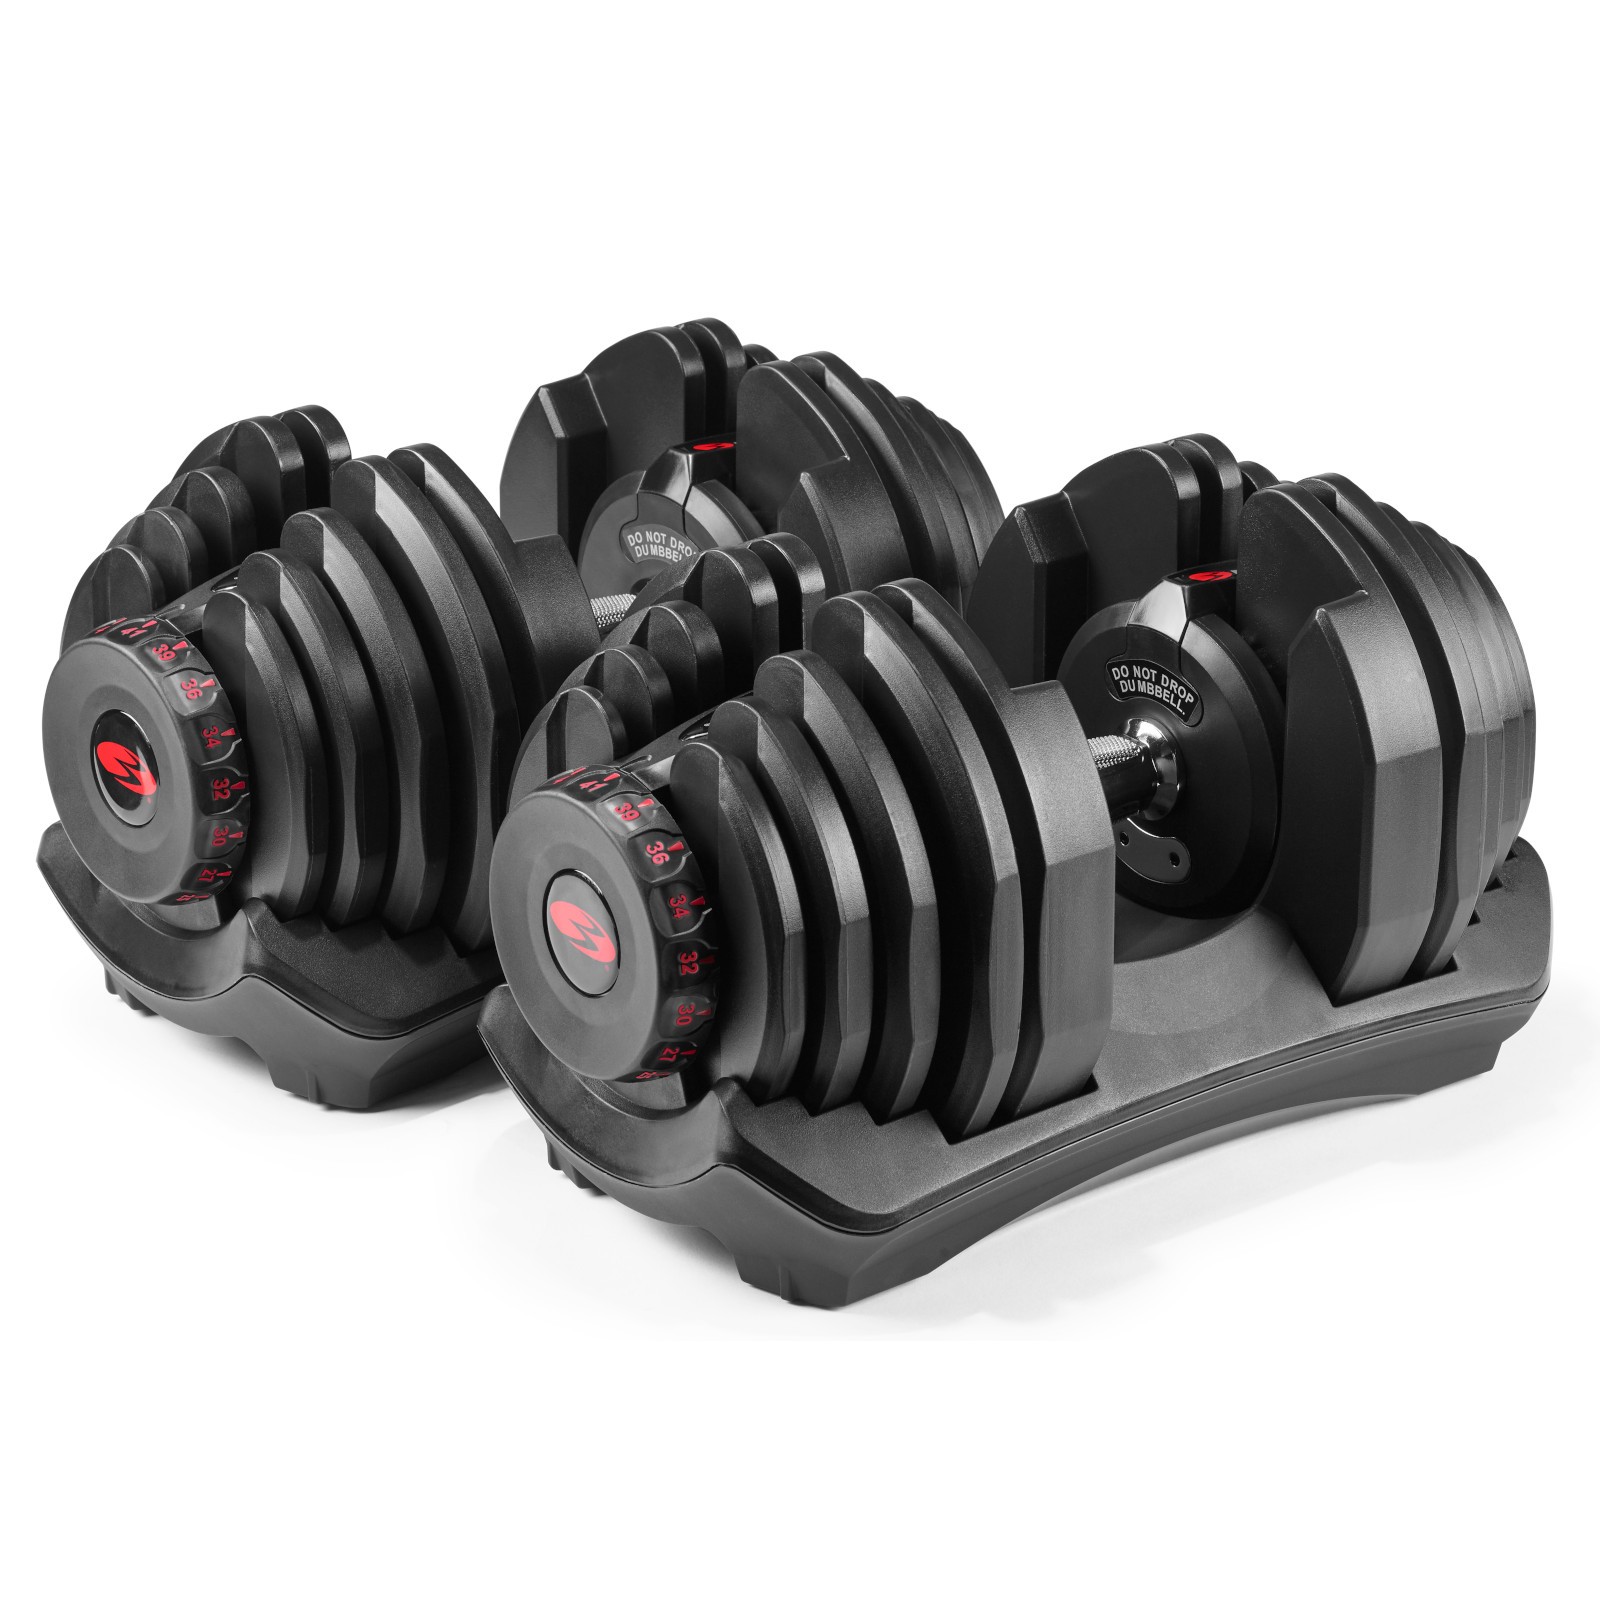 42 Women Bowflex 1090 dumbbells for sale near me for Workout at Home